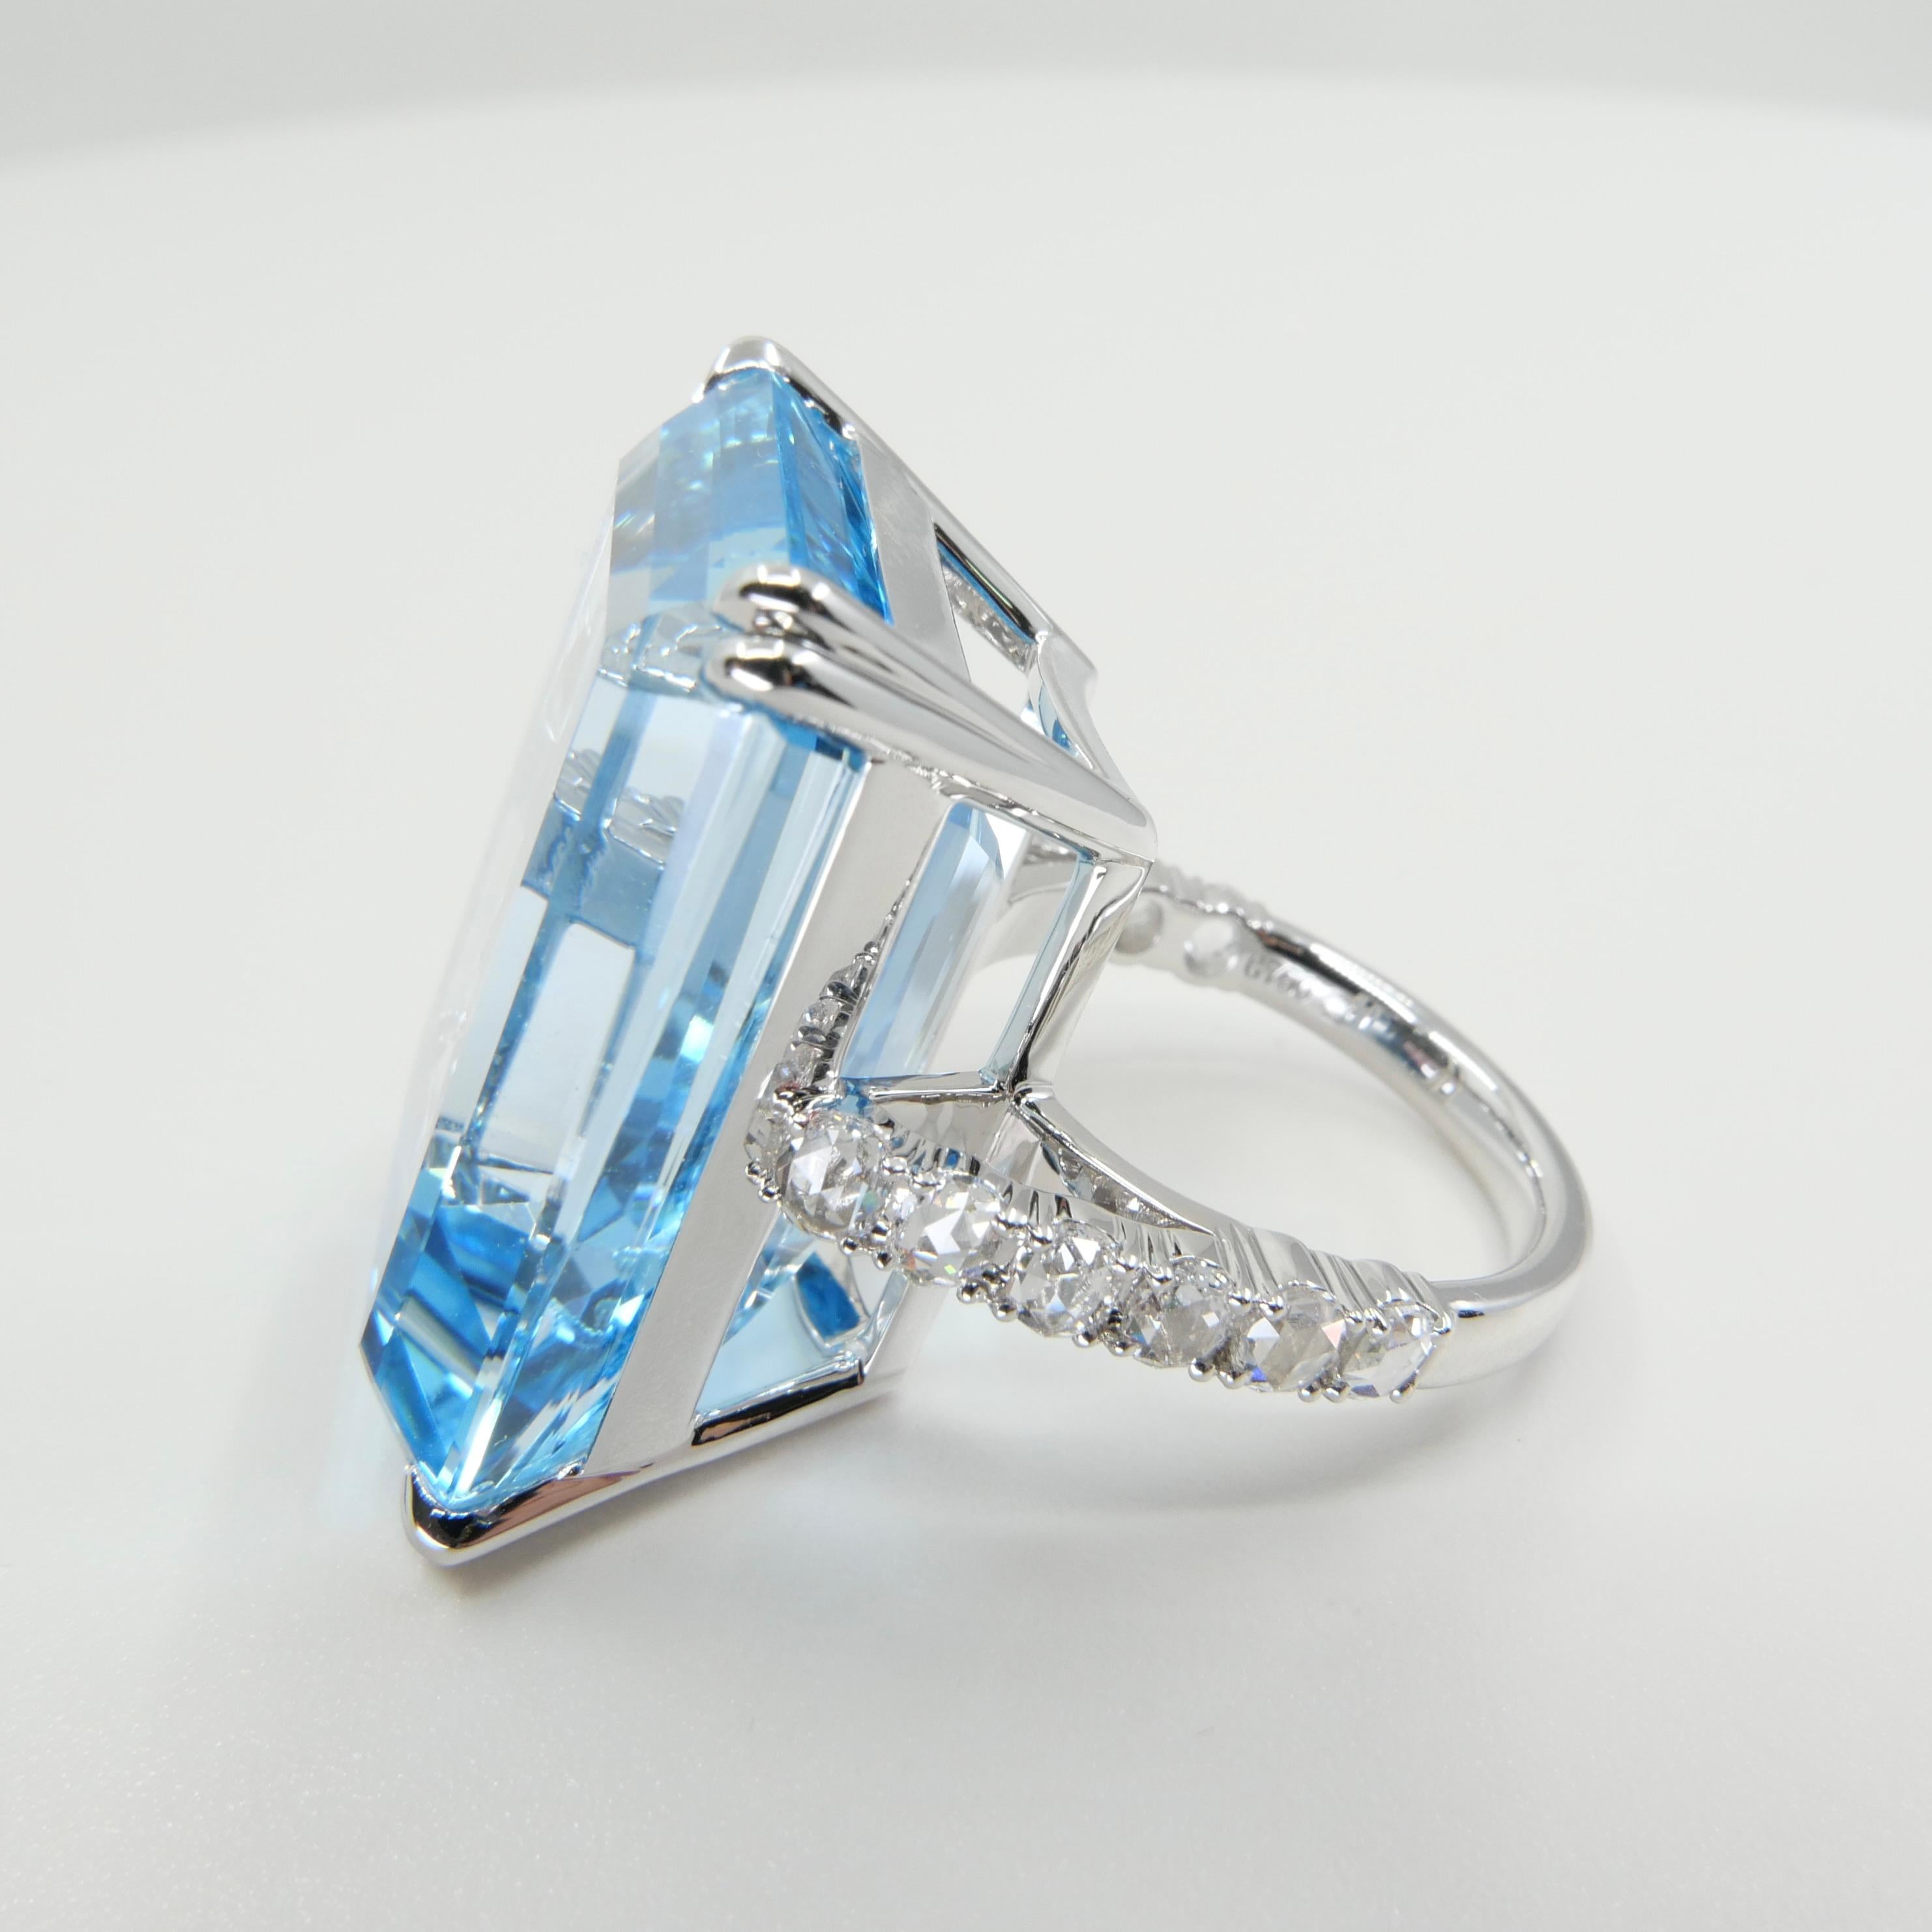 62 Cts Step Cut Blue Topaz & Rose Cut Diamond Cocktail Ring, Substantial For Sale 6